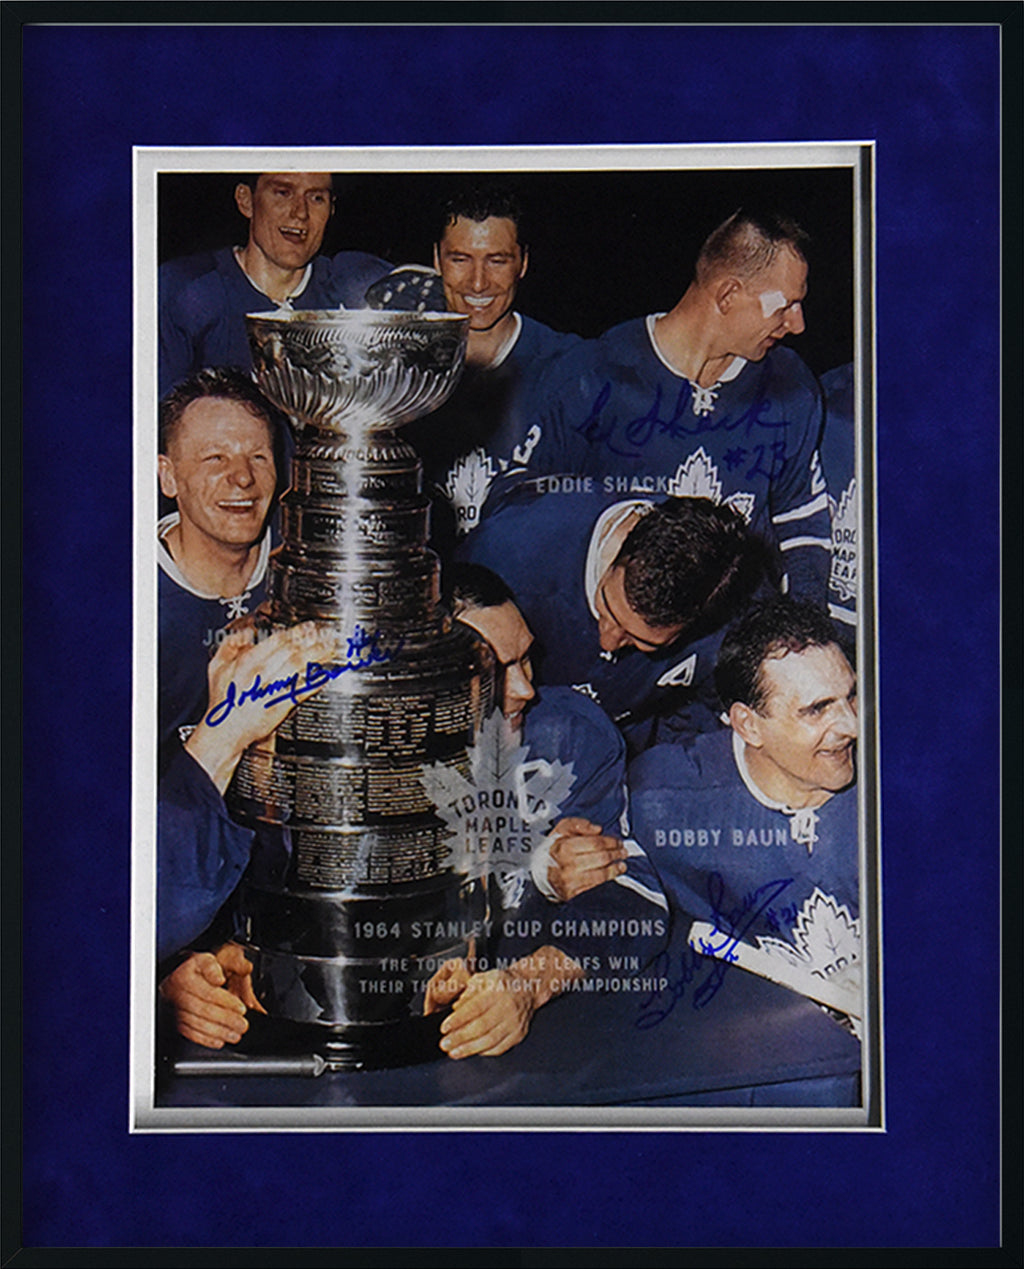 Toronto Maple Leafs 1967 Stanley Cup Champions memories signatures